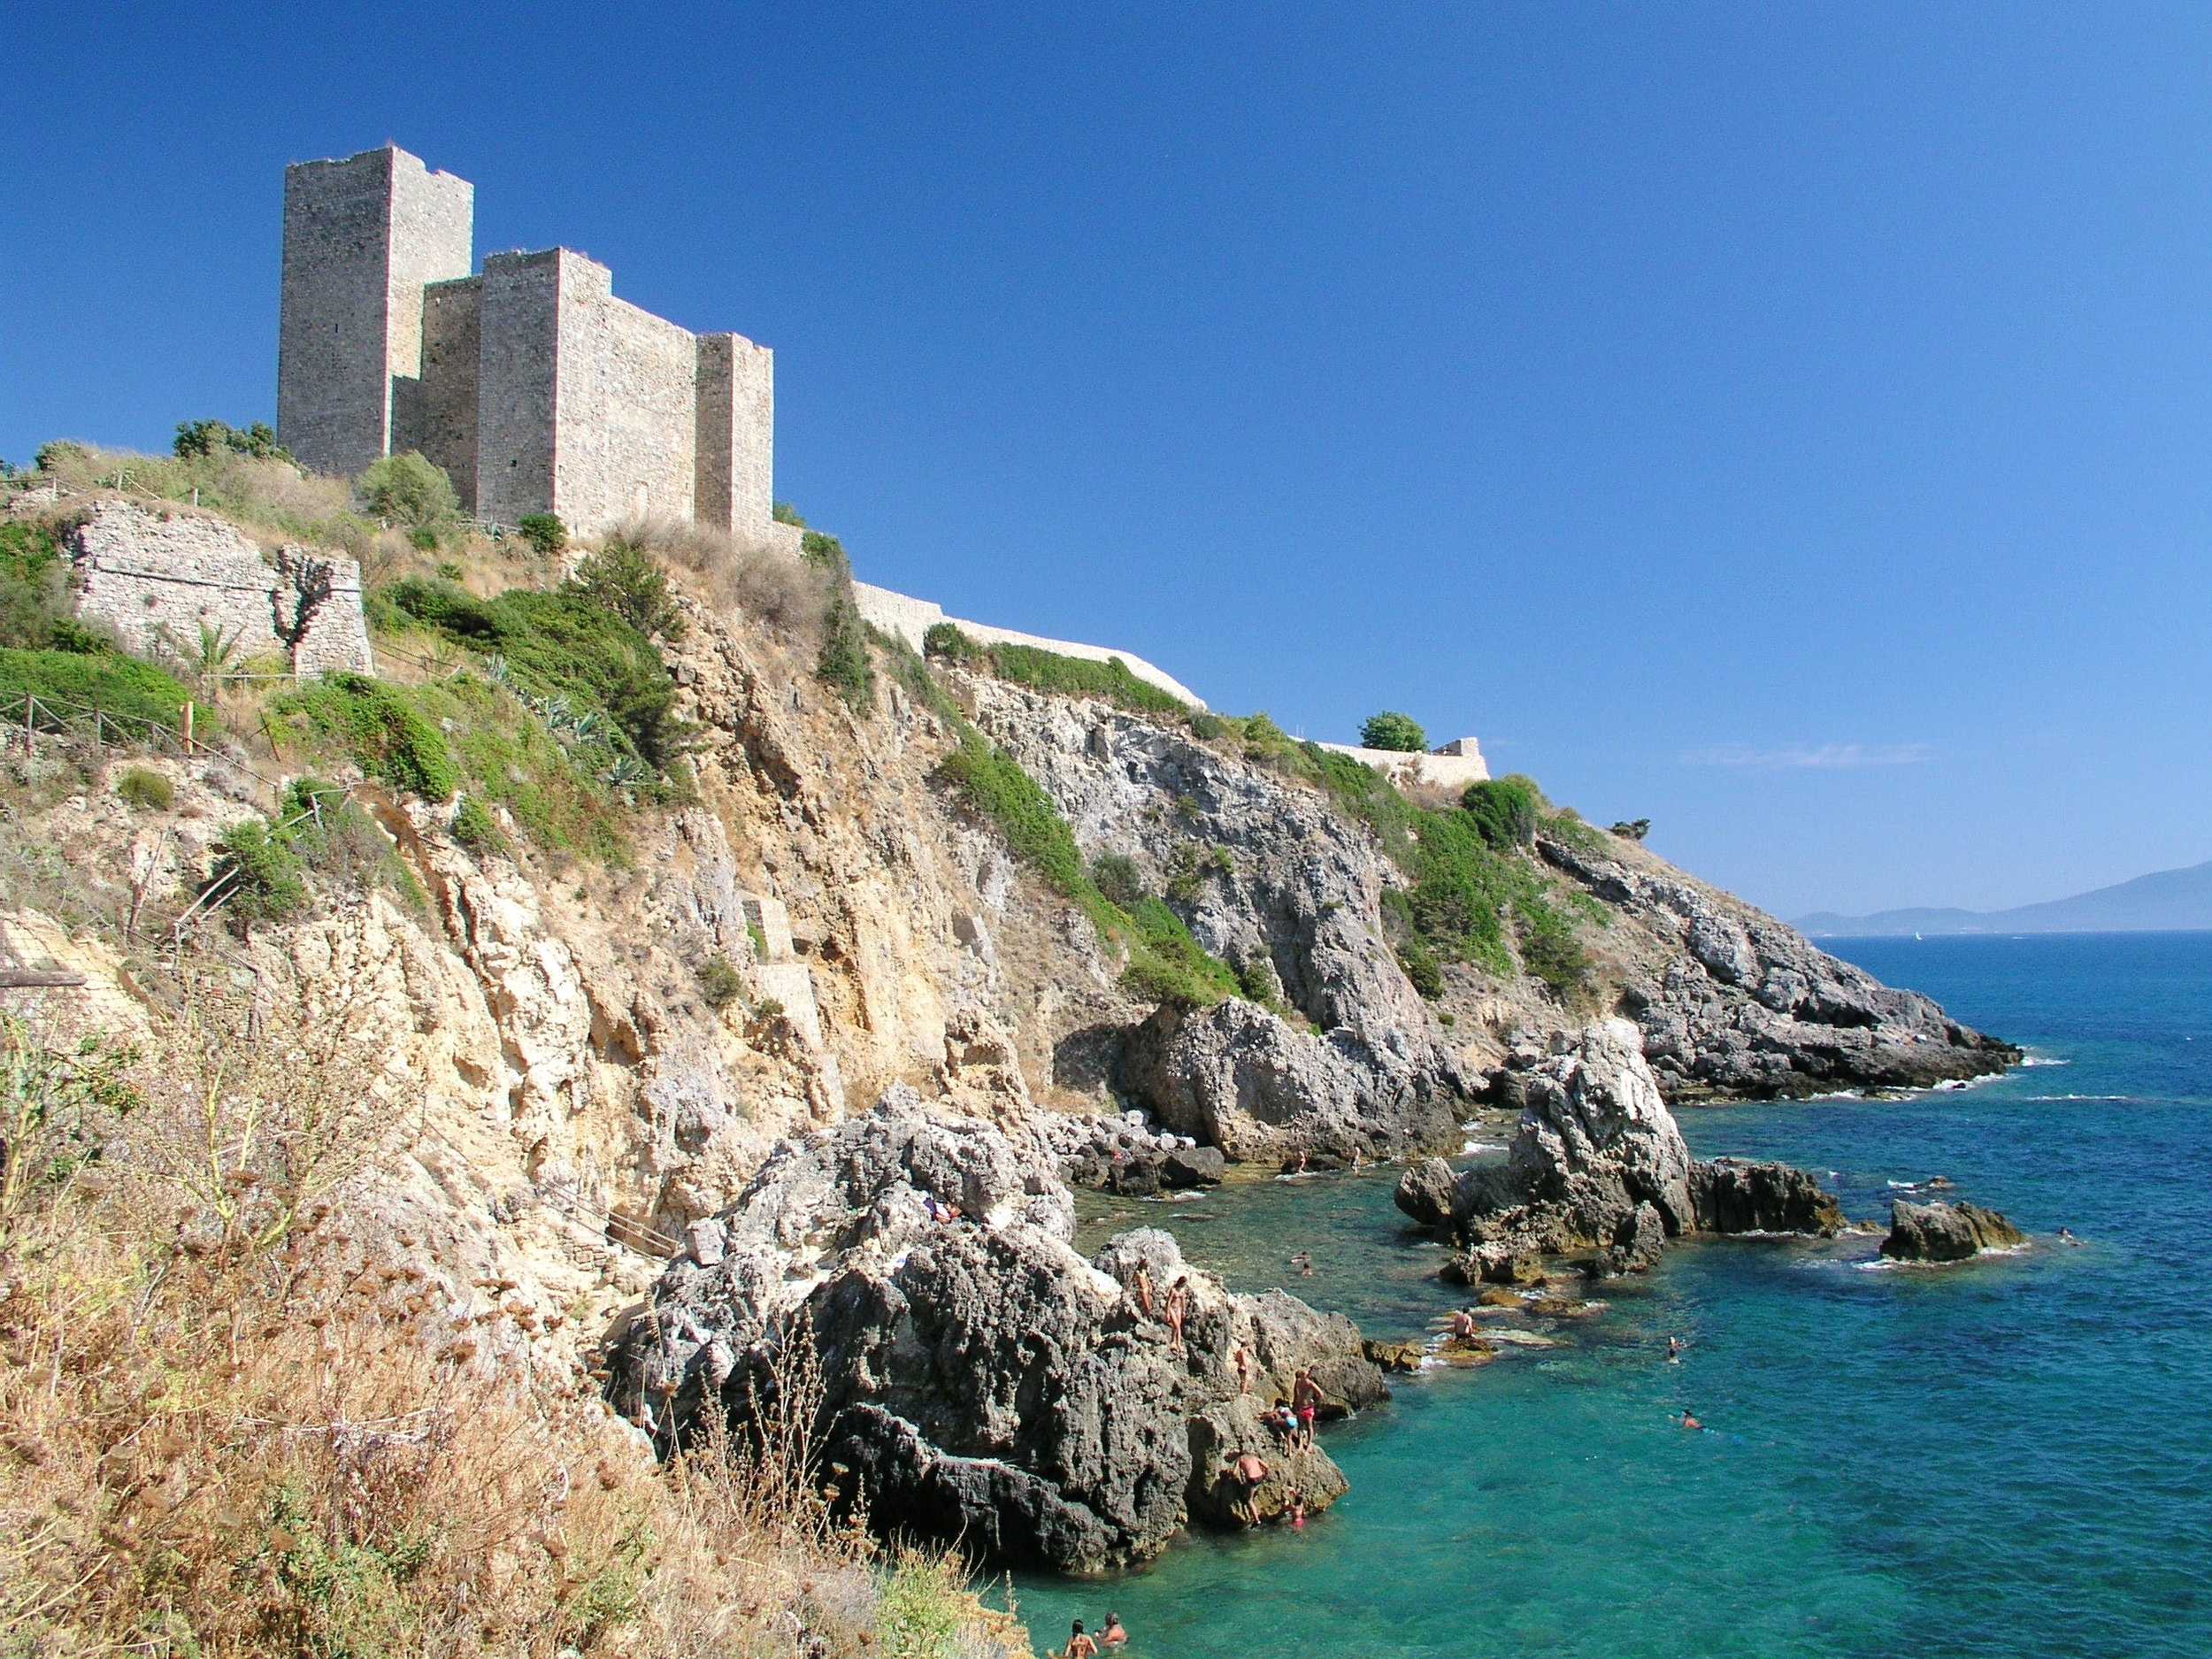 <p>Ok, so I guess Dell'Orso isn't the only place where you can swim in front of a castle. Talamone is another beach town with a castle. This one has a population of 200, three hotels, and a dozen restaurants. If you're looking for an escape, look no further. </p><p><a href='https://www.msn.com/en-us/community/channel/vid-cj9pqbr0vn9in2b6ddcd8sfgpfq6x6utp44fssrv6mc2gtybw0us'>Follow us on MSN to see more of our exclusive lifestyle content.</a></p>